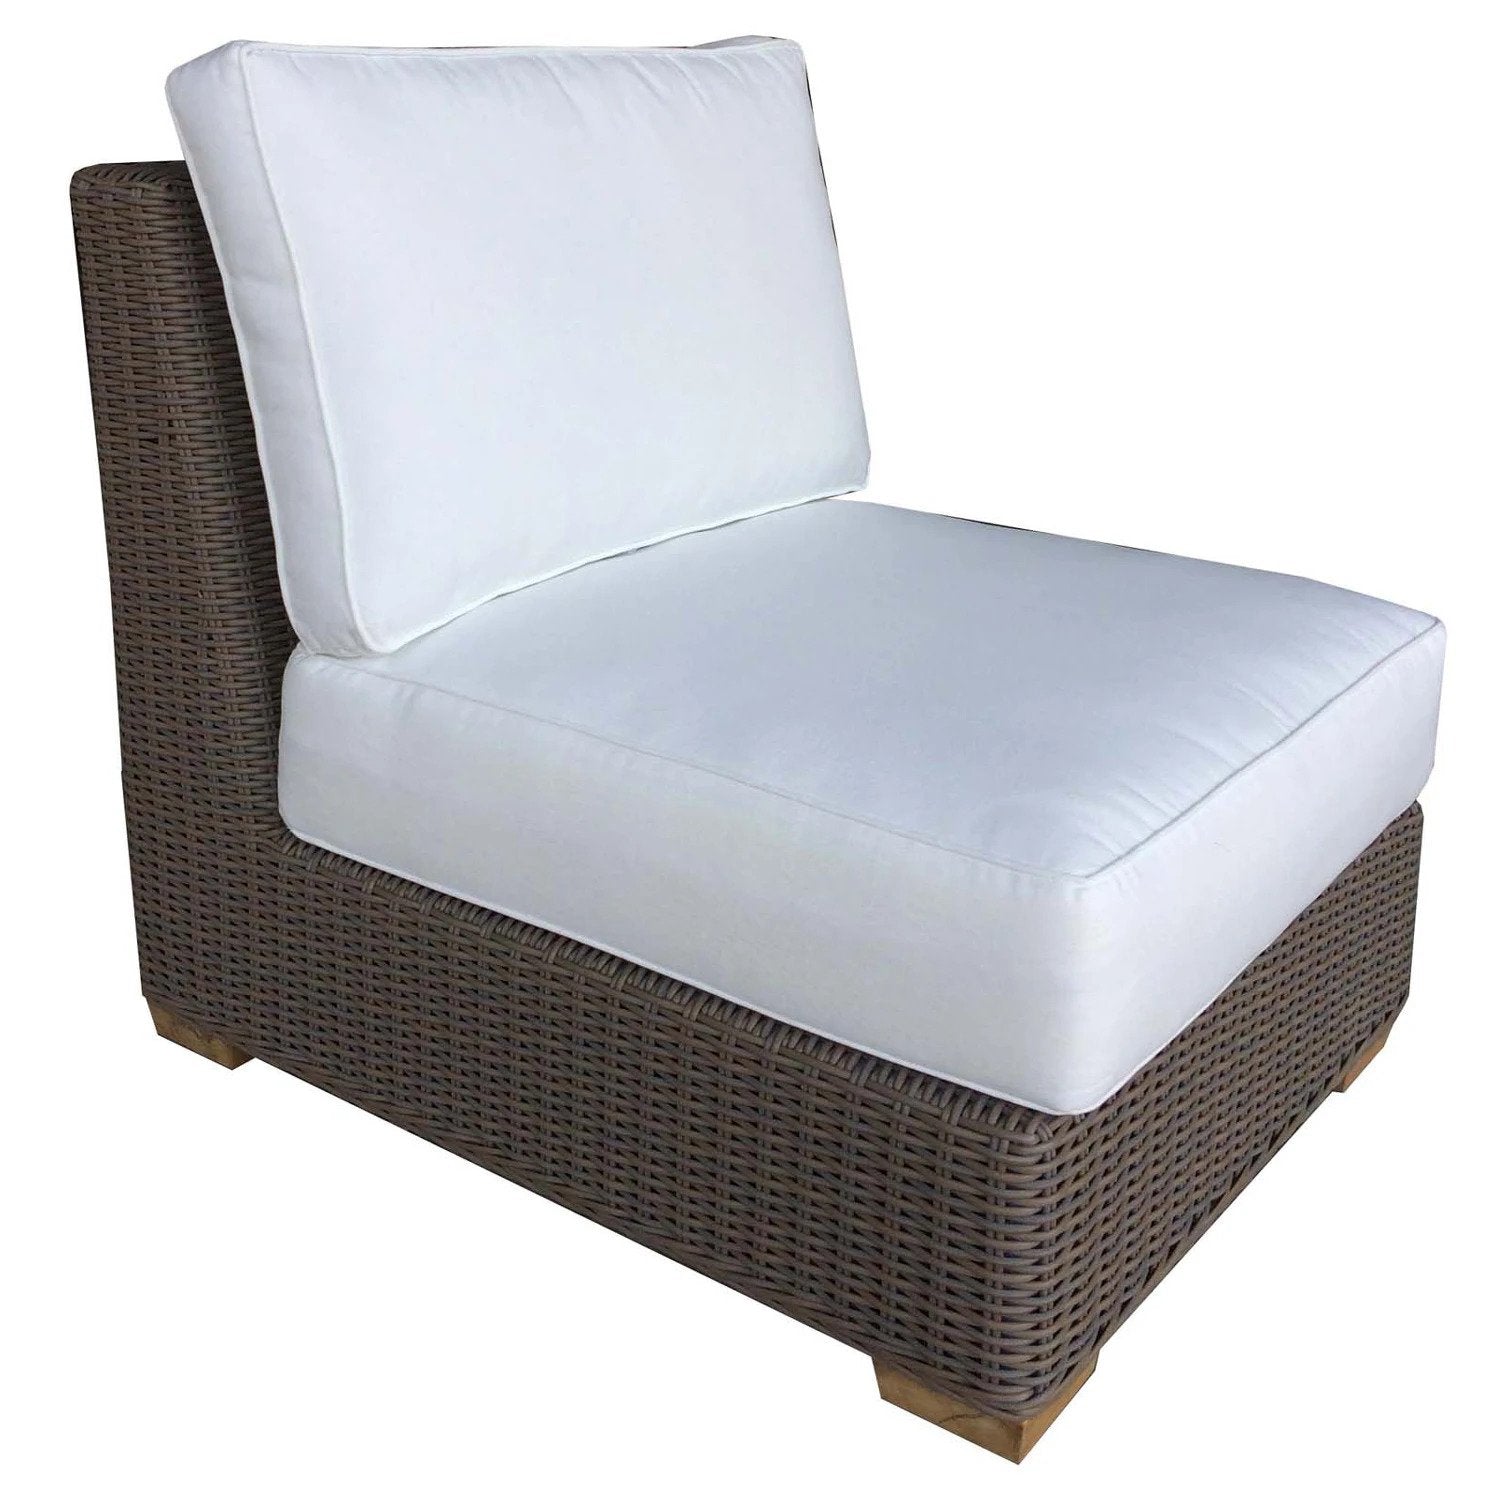 Nautilus Outdoor Armless Chair in grey Kubu weave from Padma's Plantation